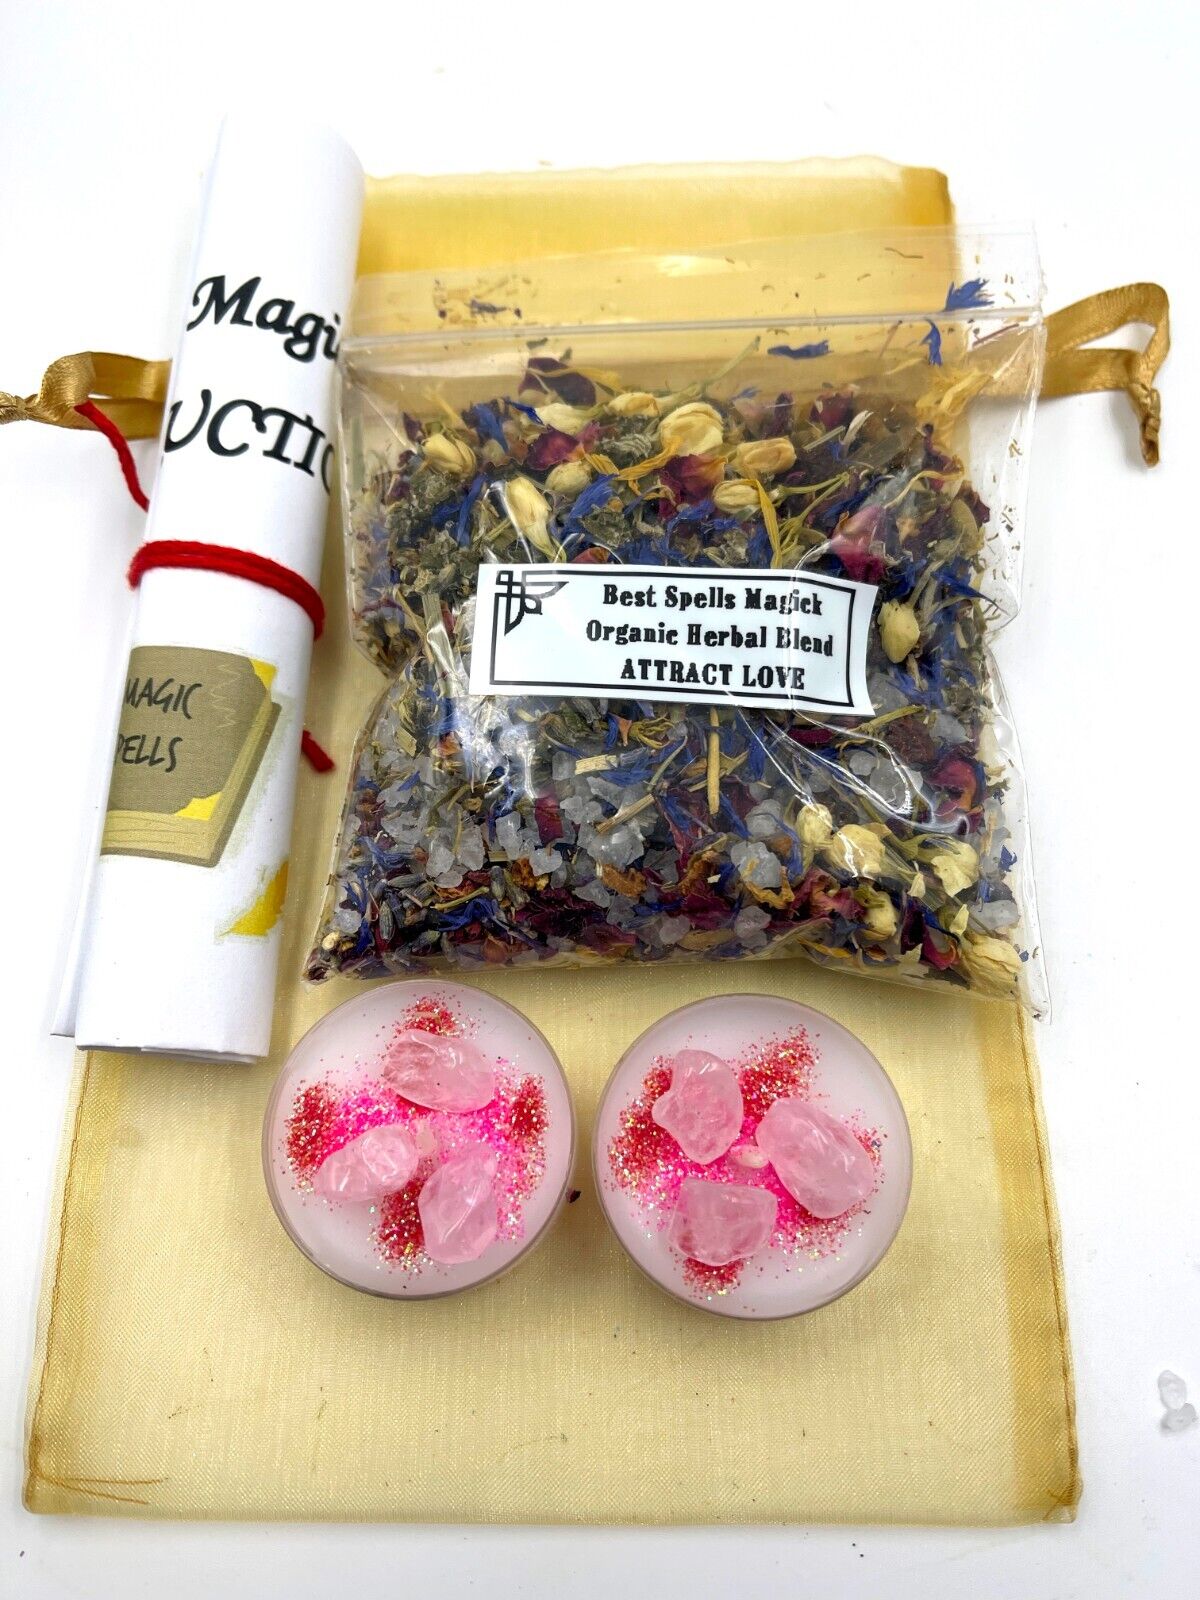 ATTRACT LOVE HERBAL BATH SPELL KIT that Works Fast by Old Witch Secret